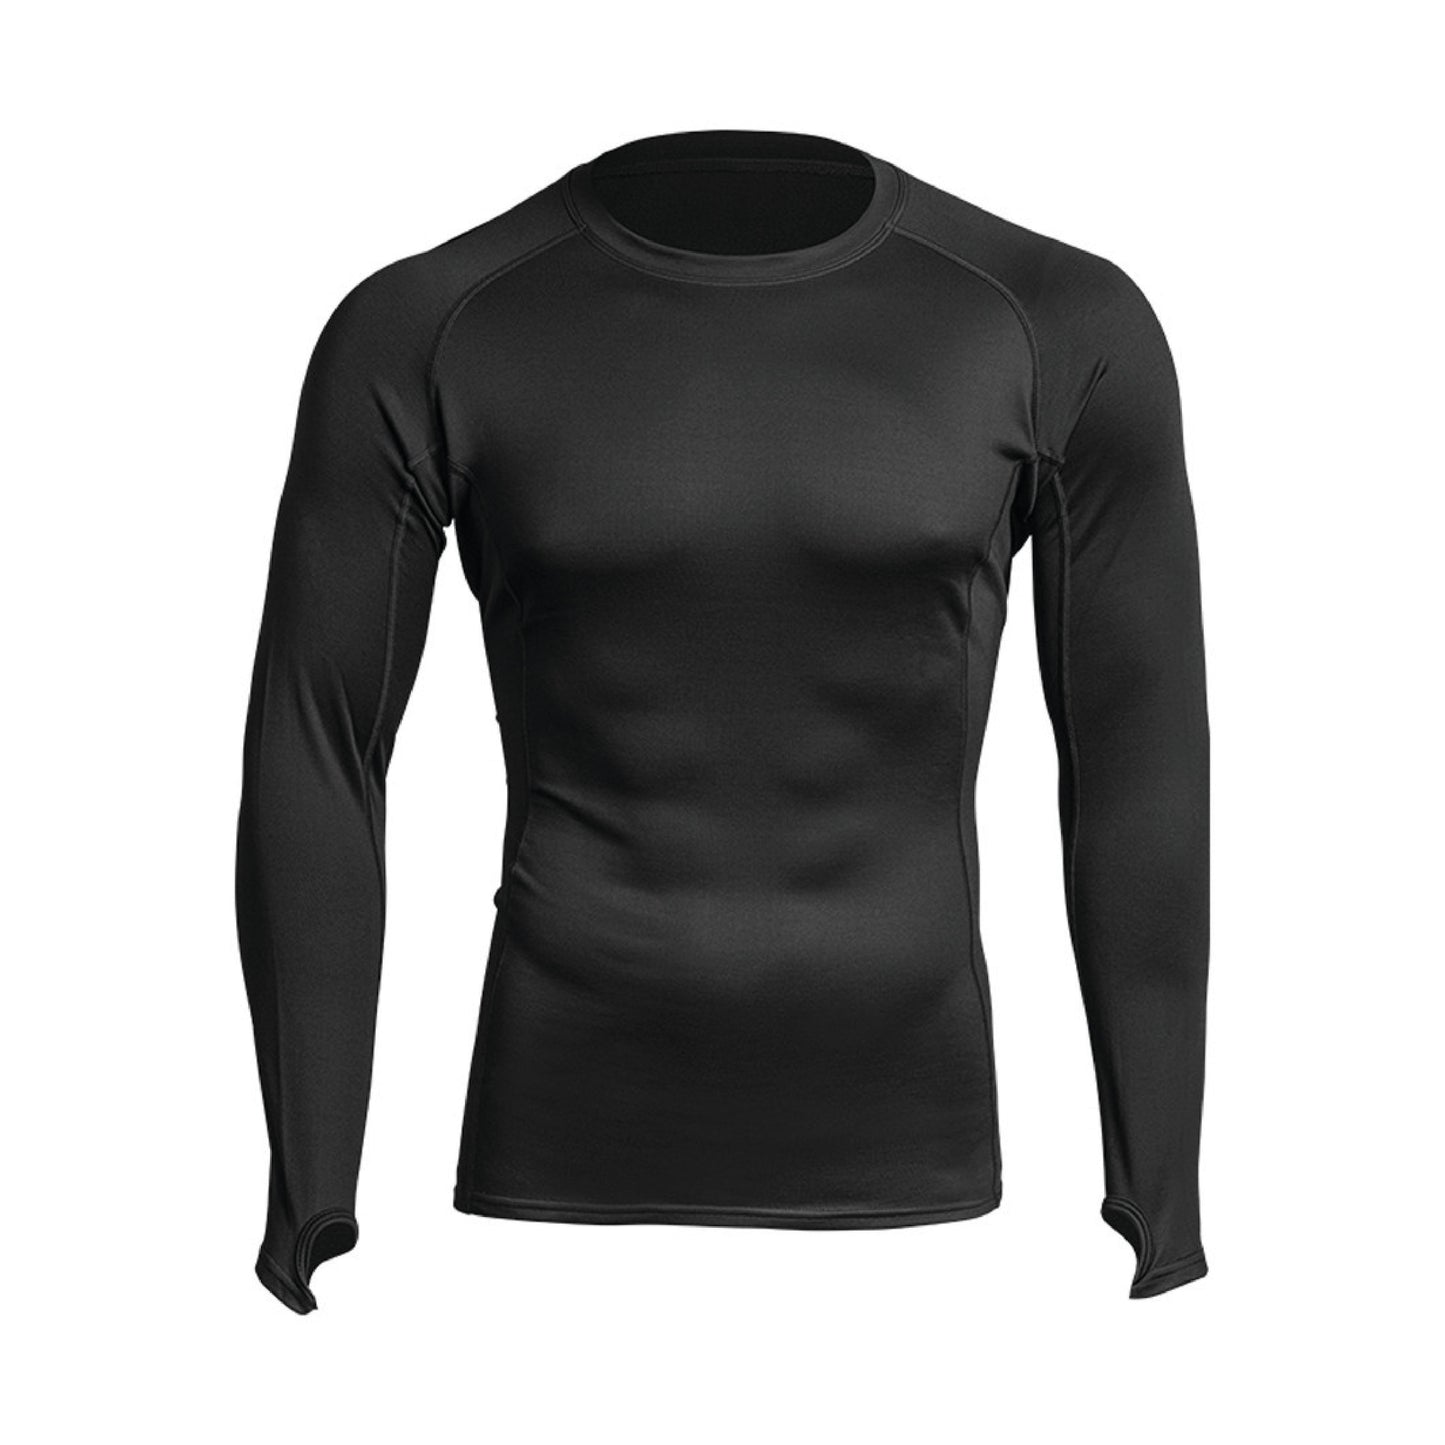 A10 Thermo Performer longsleeve schwarz